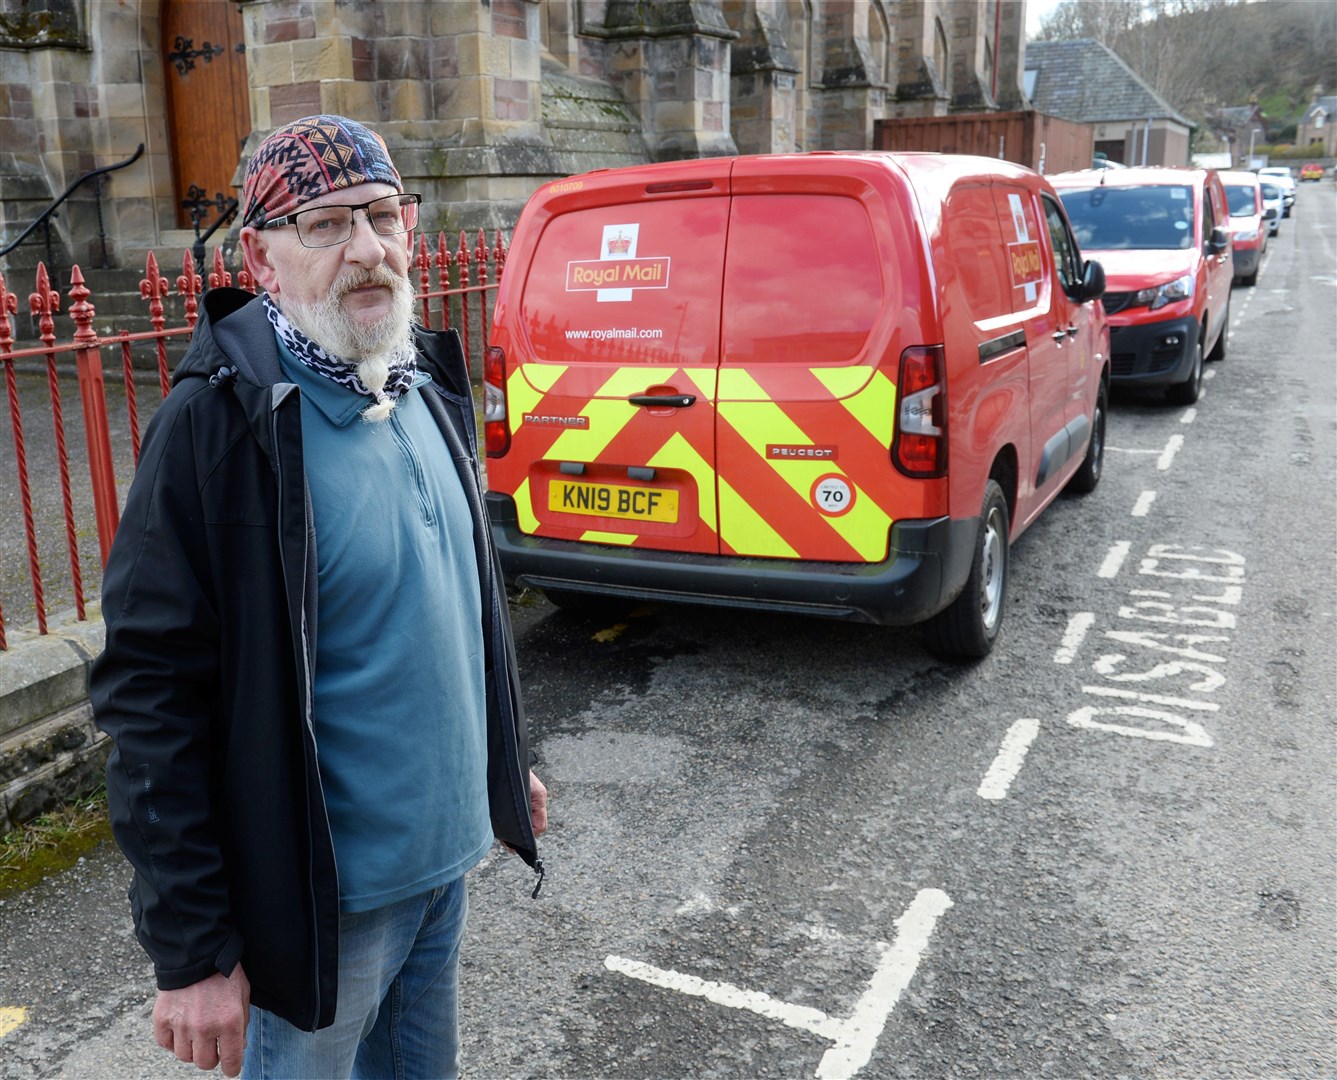 Leslie Mikolajczyk is unhappy with Royal Mail staff with vans parking in disabled spaces and on double yellow lines. Picture: Gary Anthony.